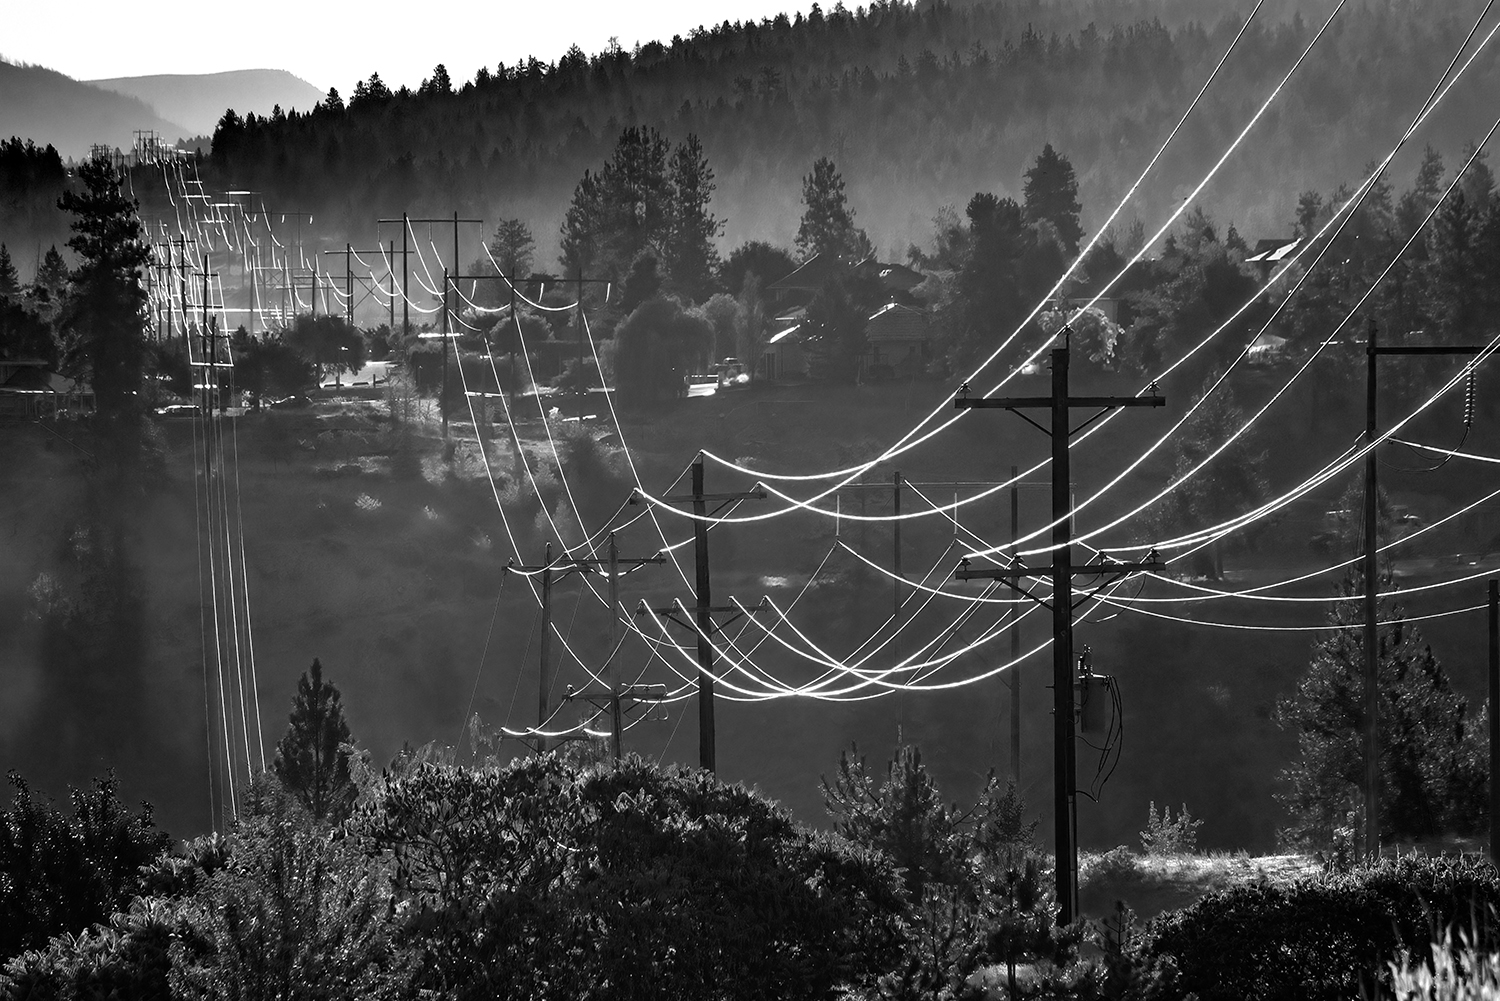 Kamloops grayscale telephone lines with long wires and tall tree forests